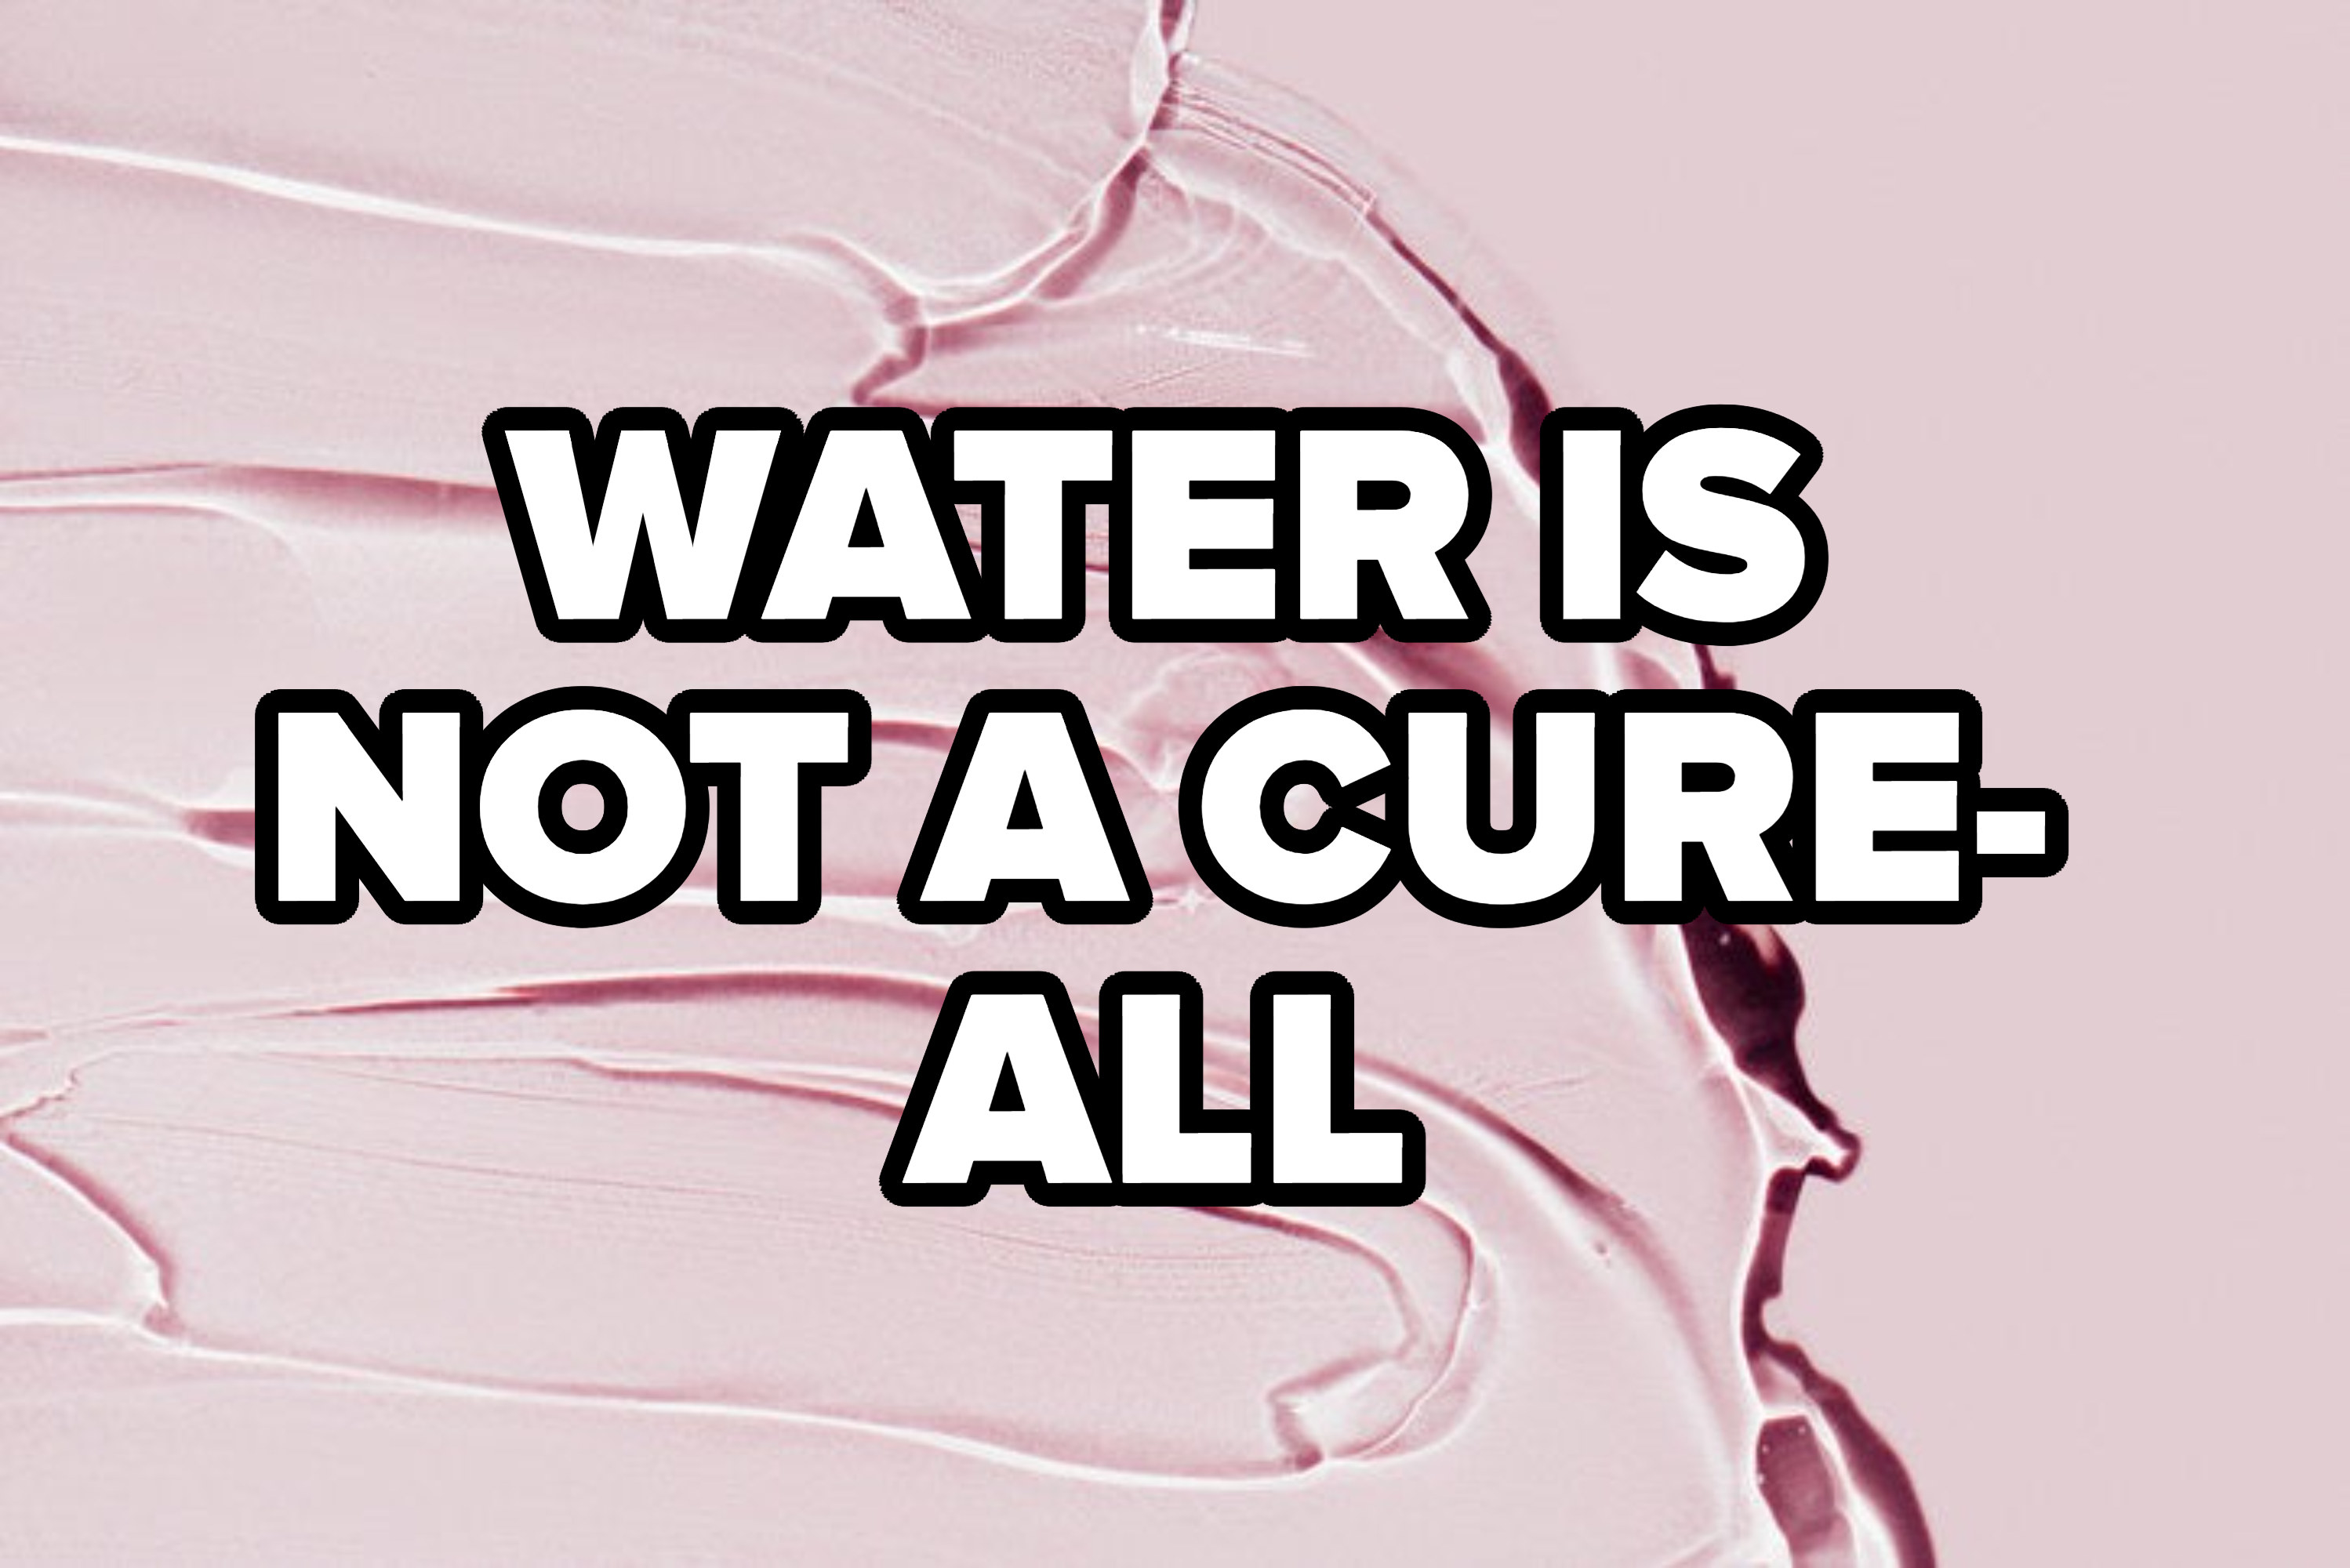 &quot;WATER IS NOT A CURE-ALL&quot;